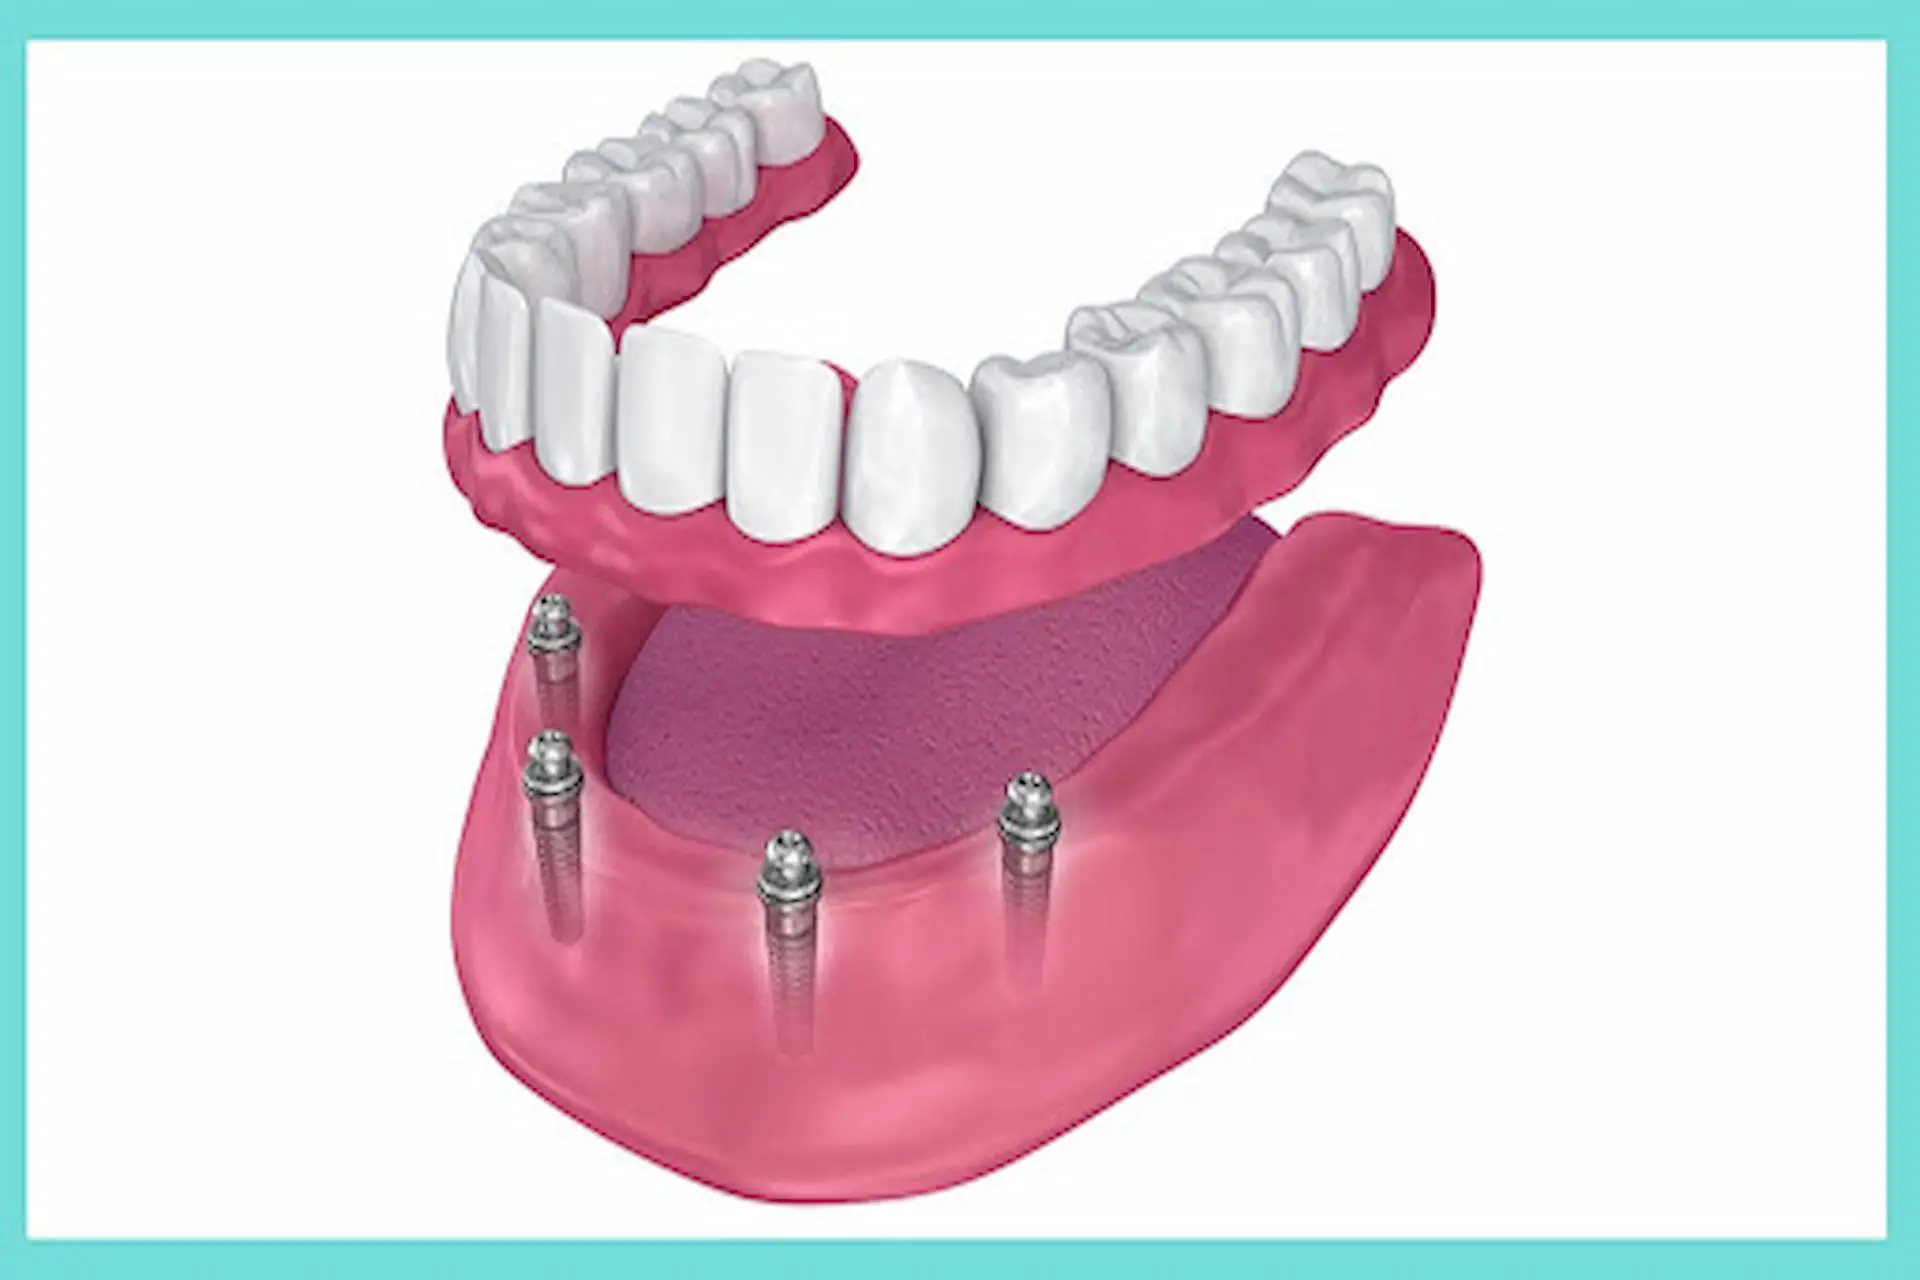 Dental Implants And How Do They Work? A Comprehensive Overview